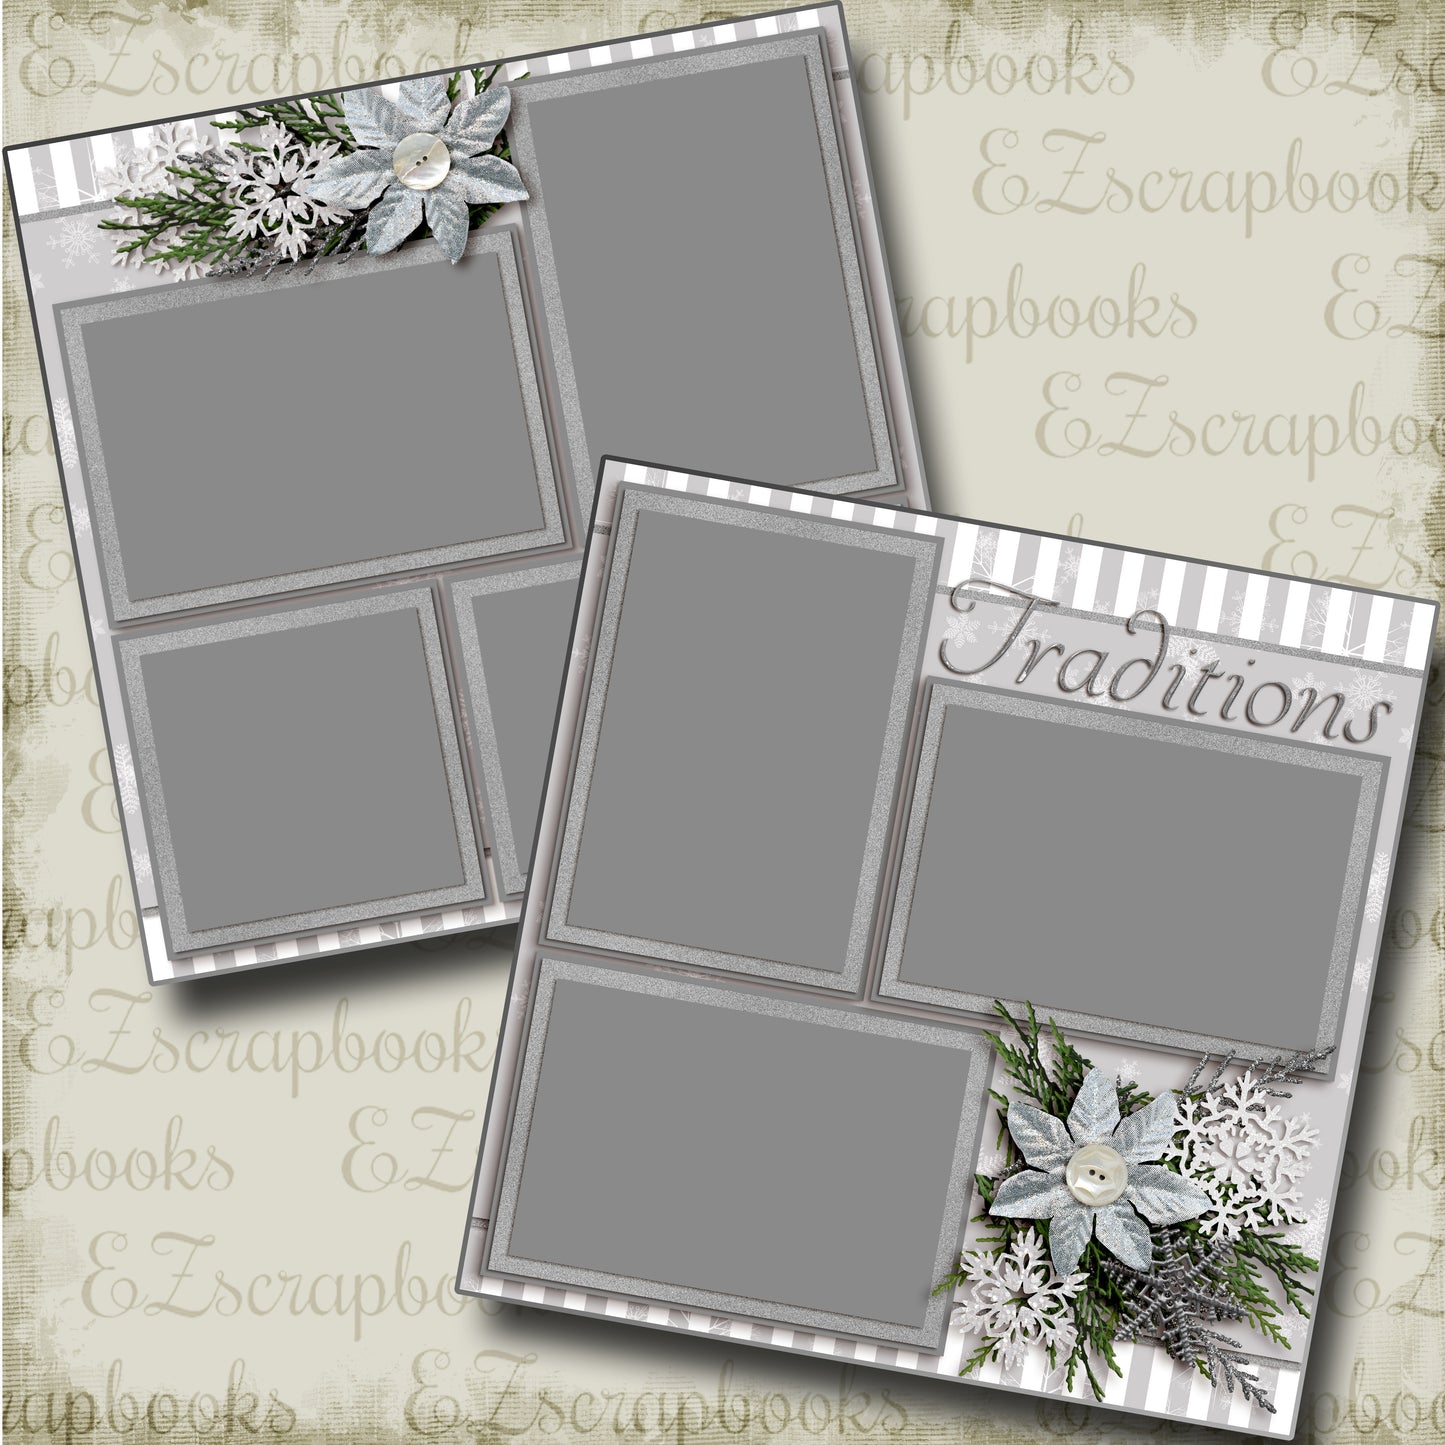 Traditions - 3584 - EZscrapbooks Scrapbook Layouts Christmas, New Year's